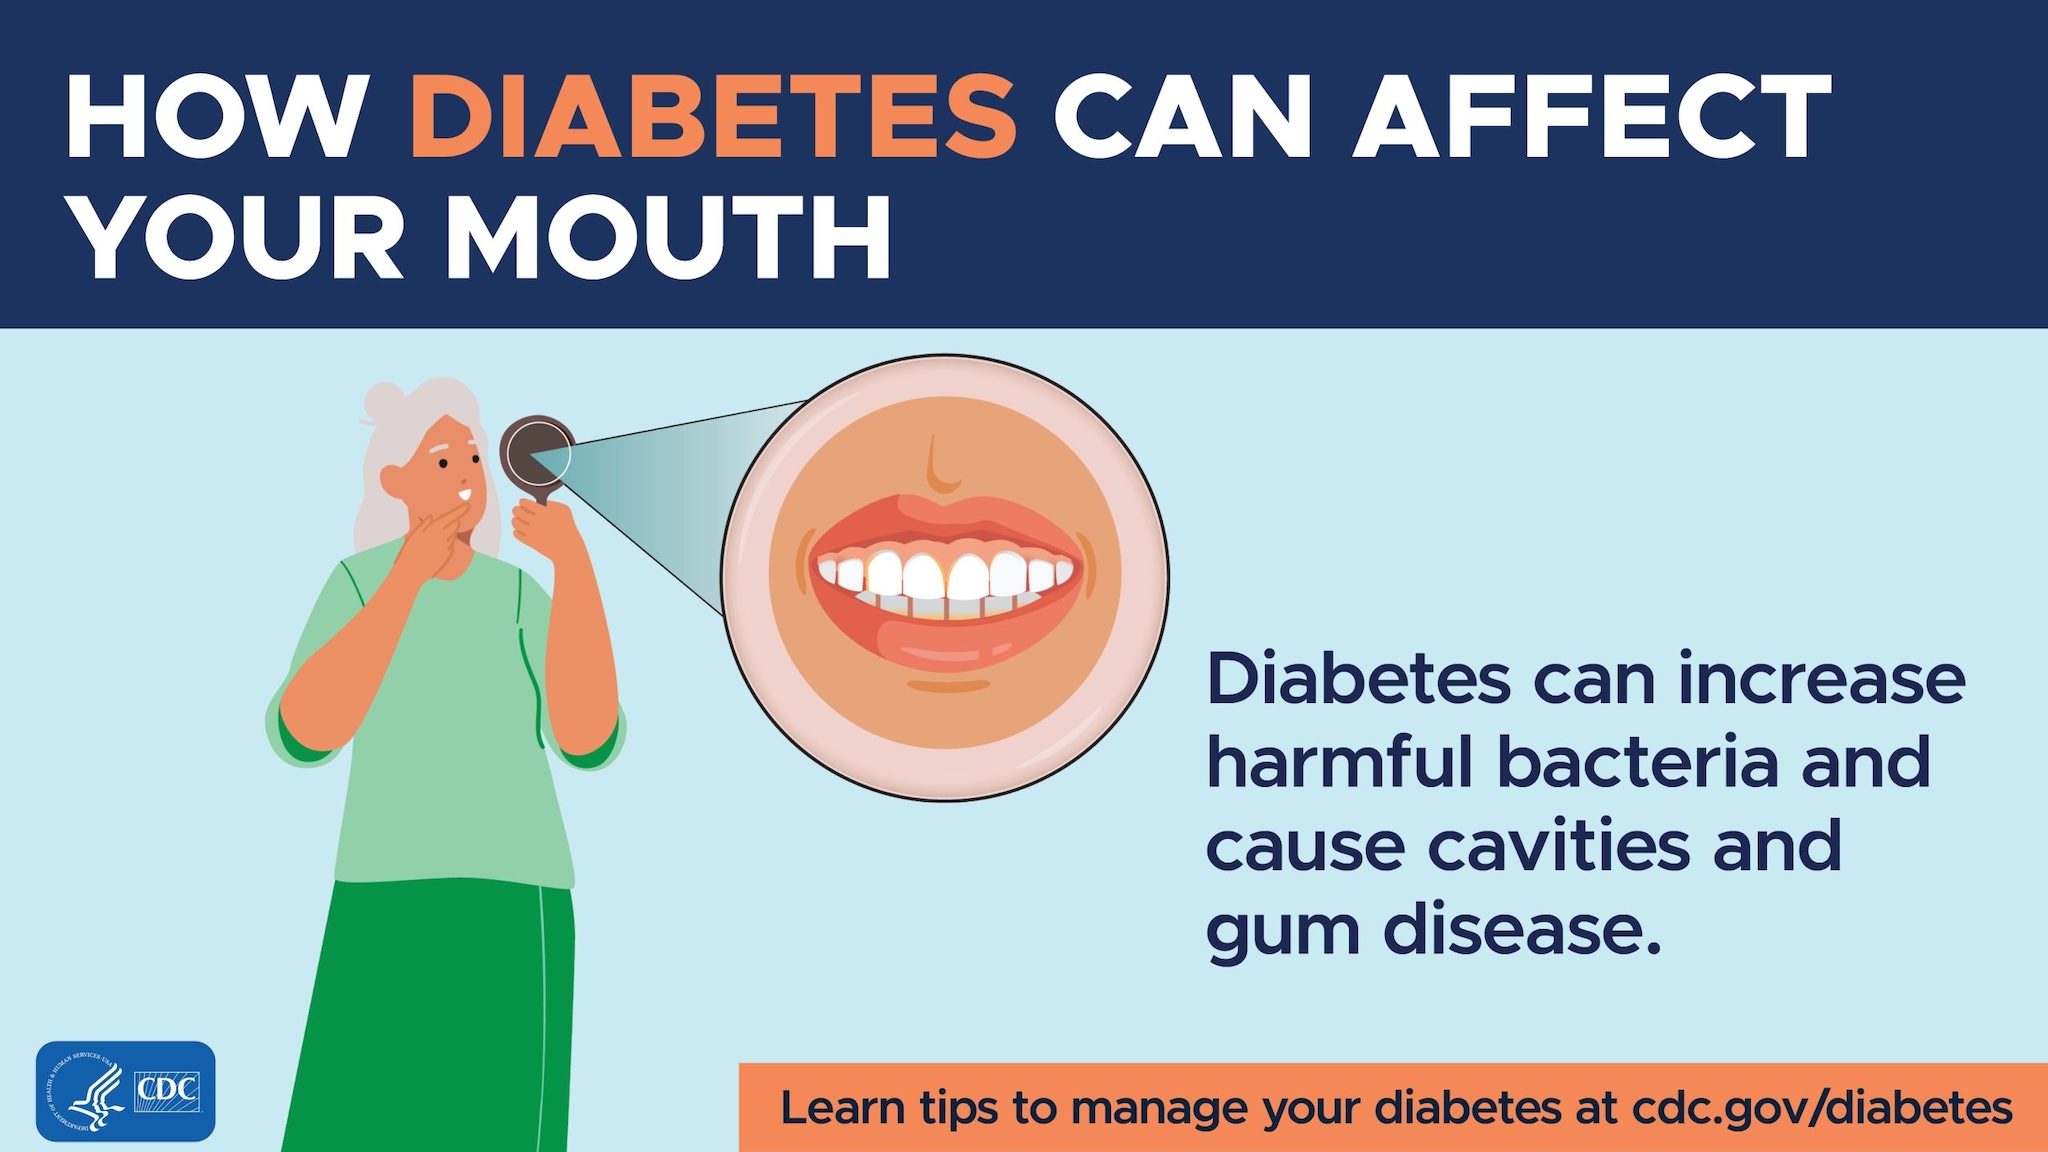 Diabetes can increase harmful bacteria and cause cavities and gum disease.